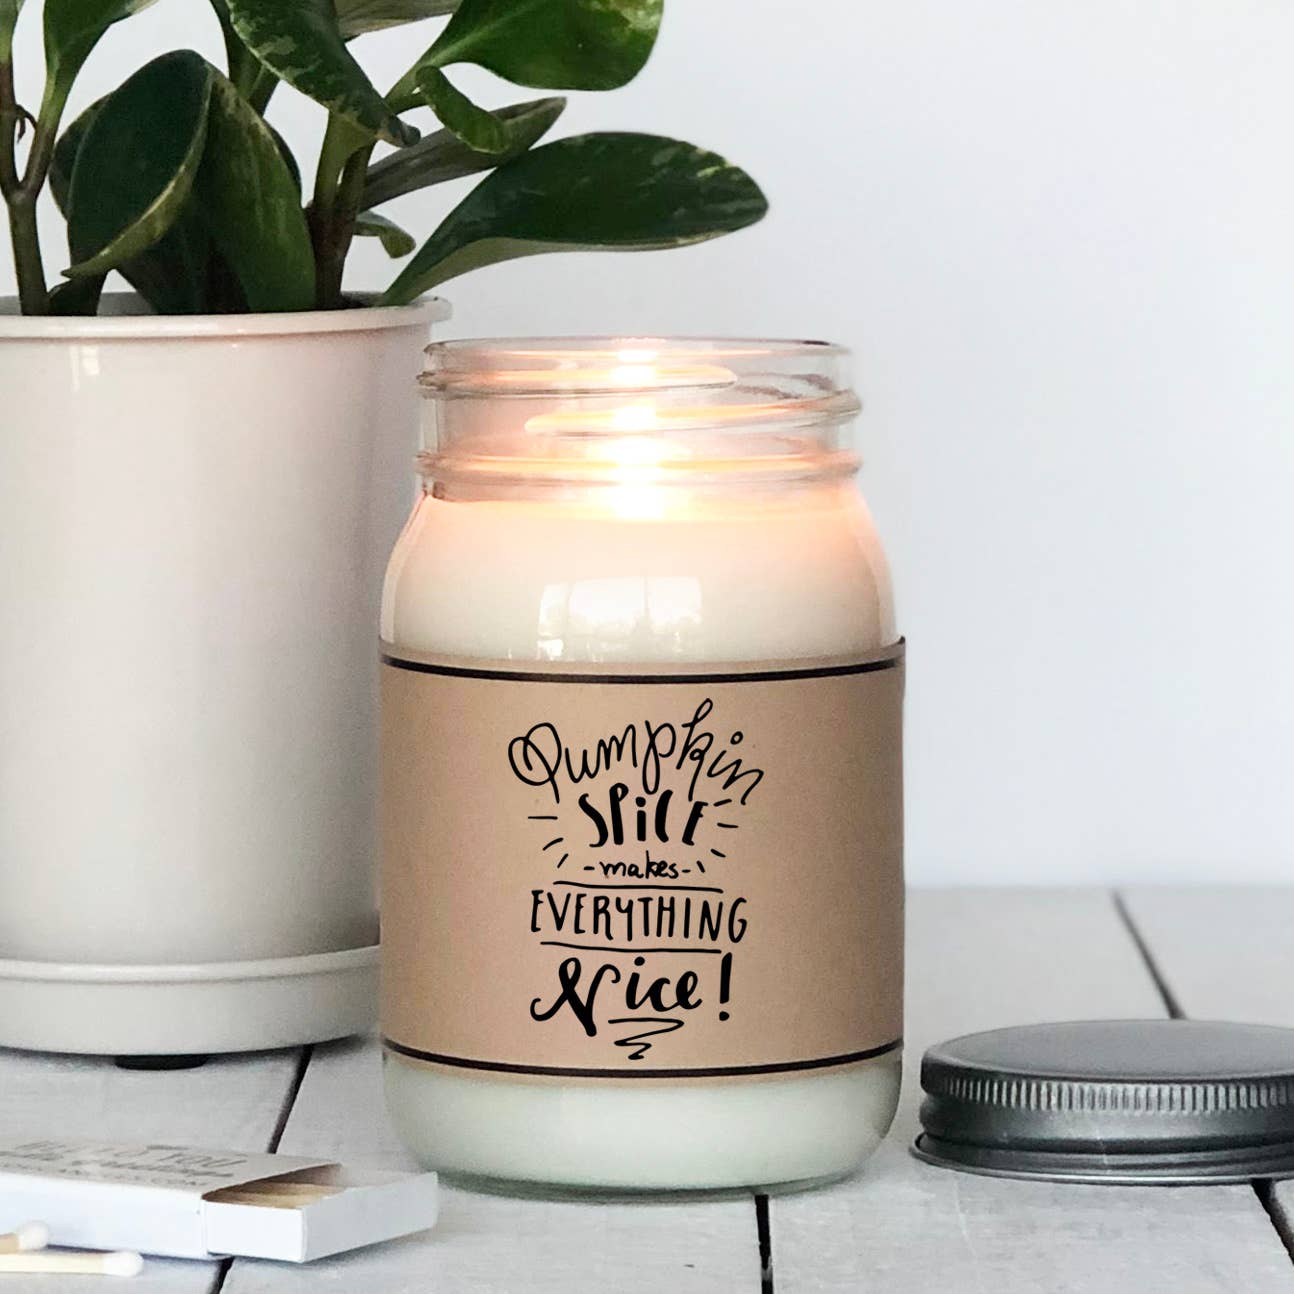 Pumpkin Spice & Everything Nice Candle